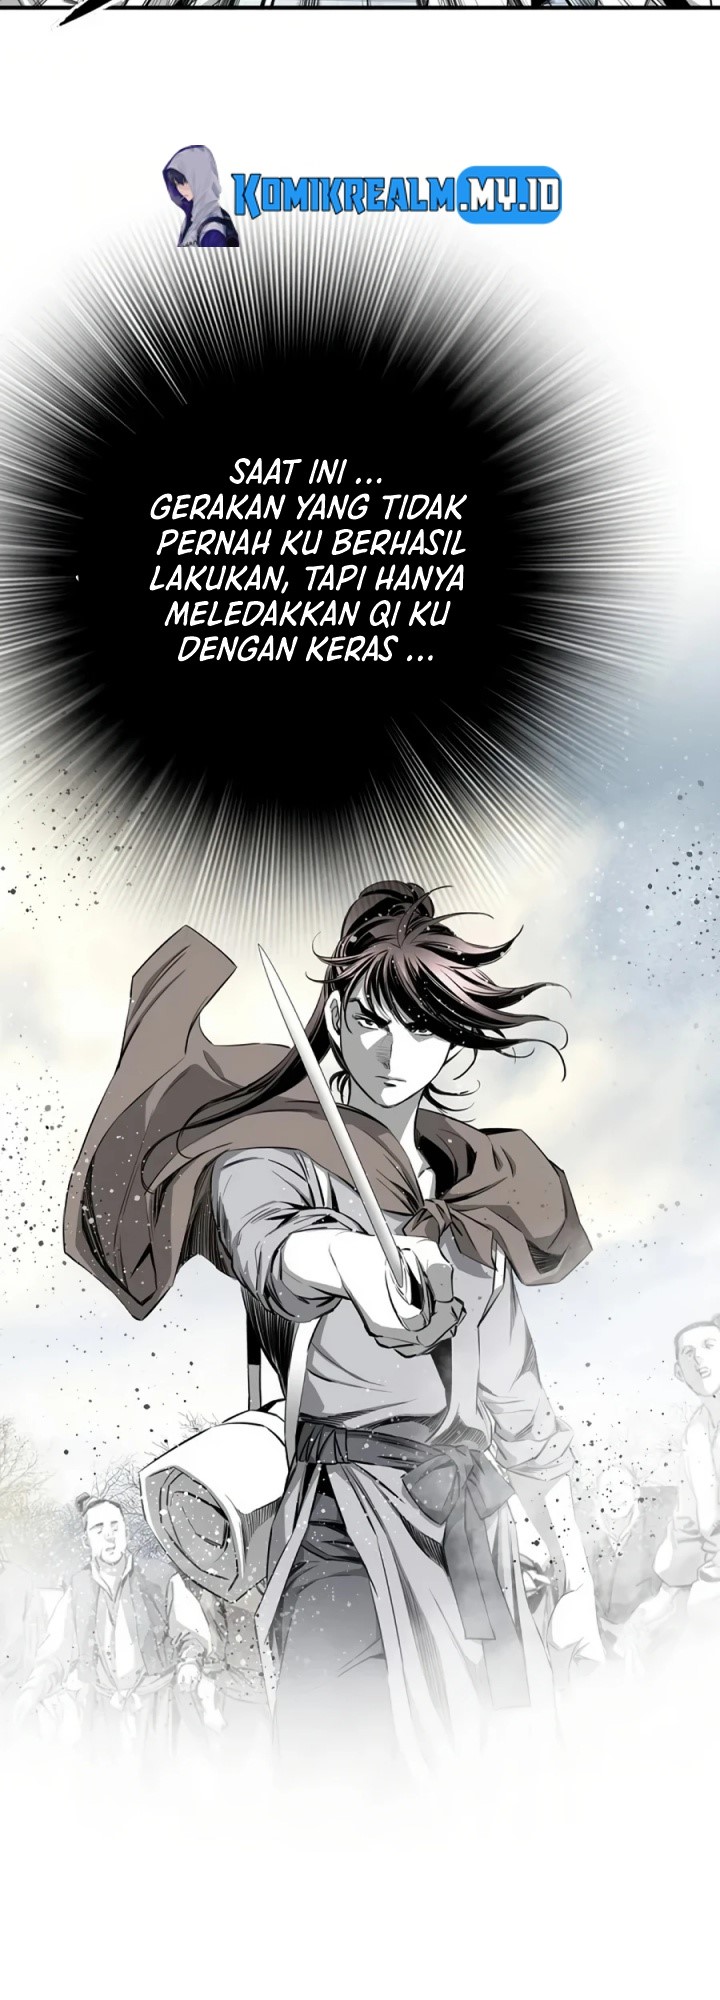 Way To Heaven Chapter 74